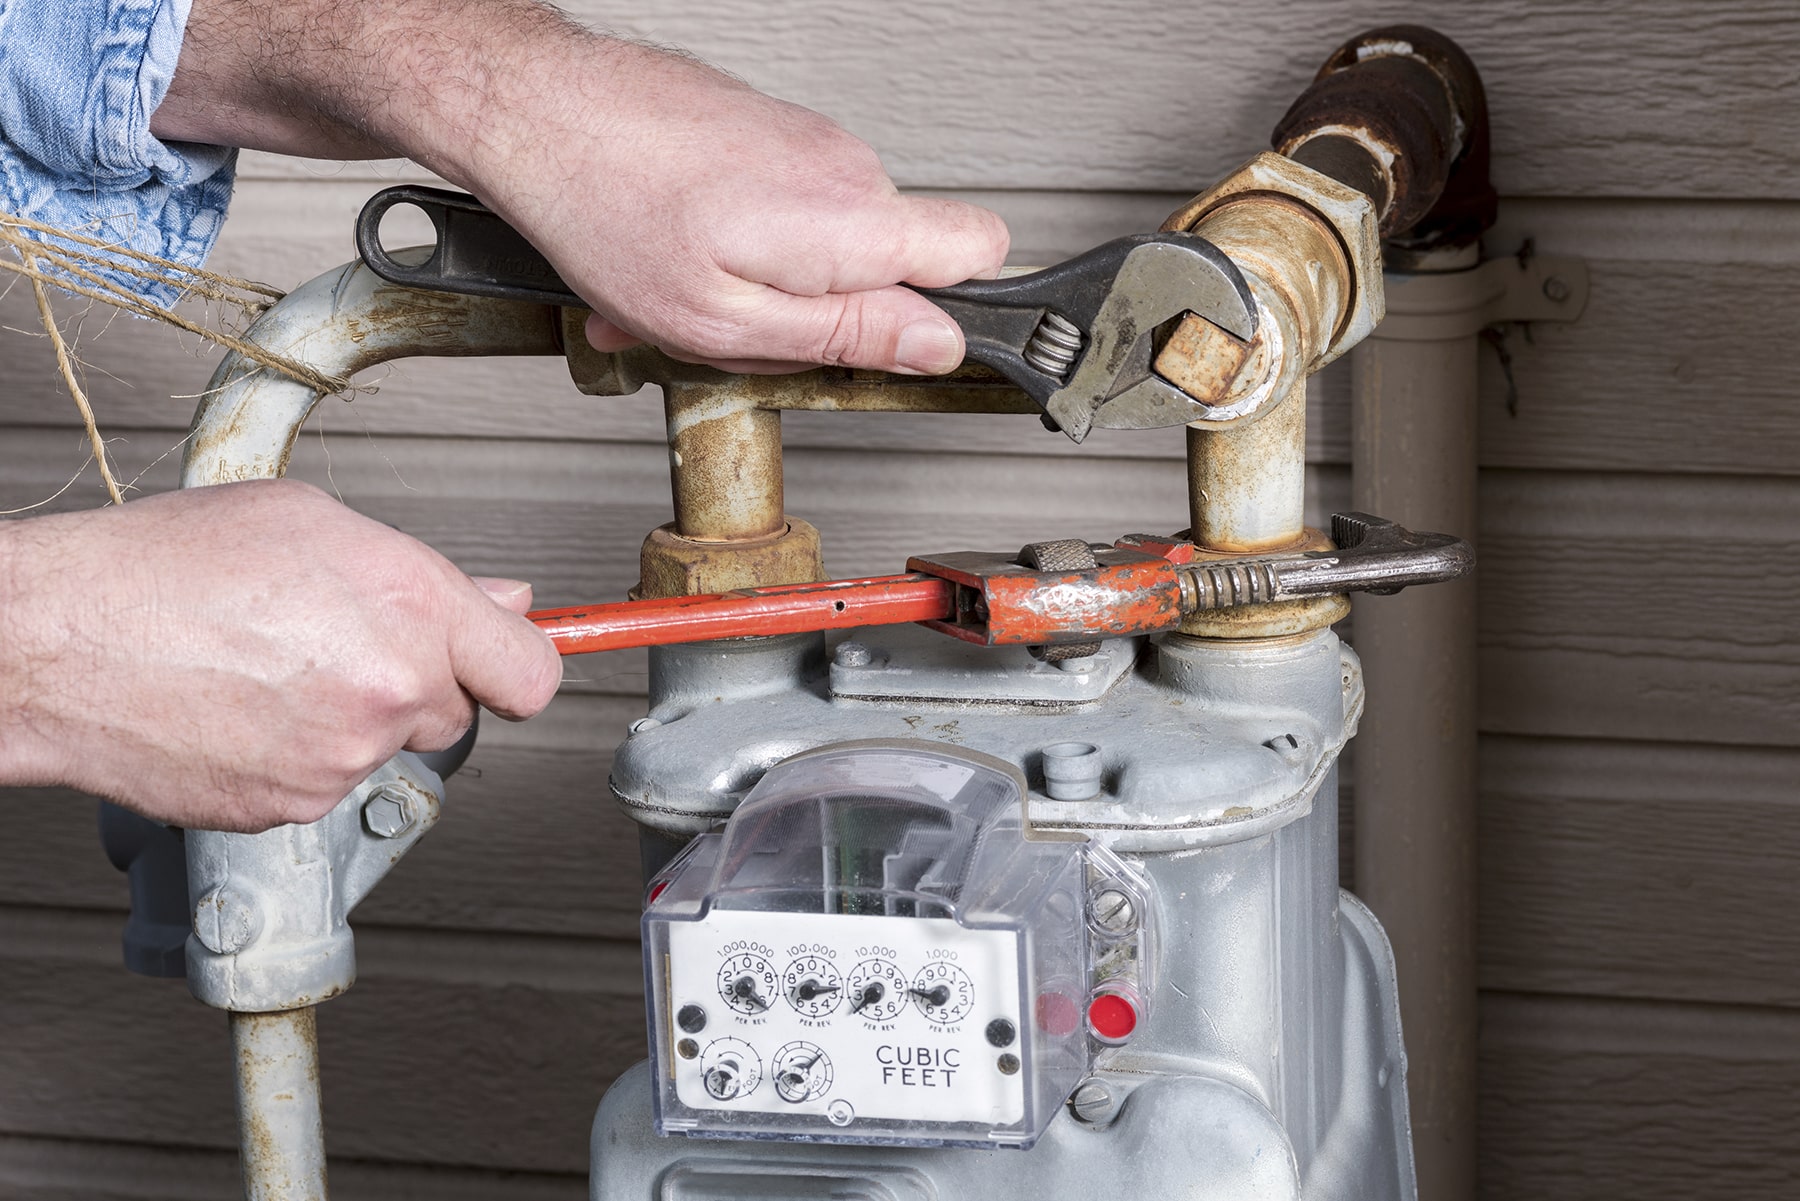 How Does A Gas Furnace Work?